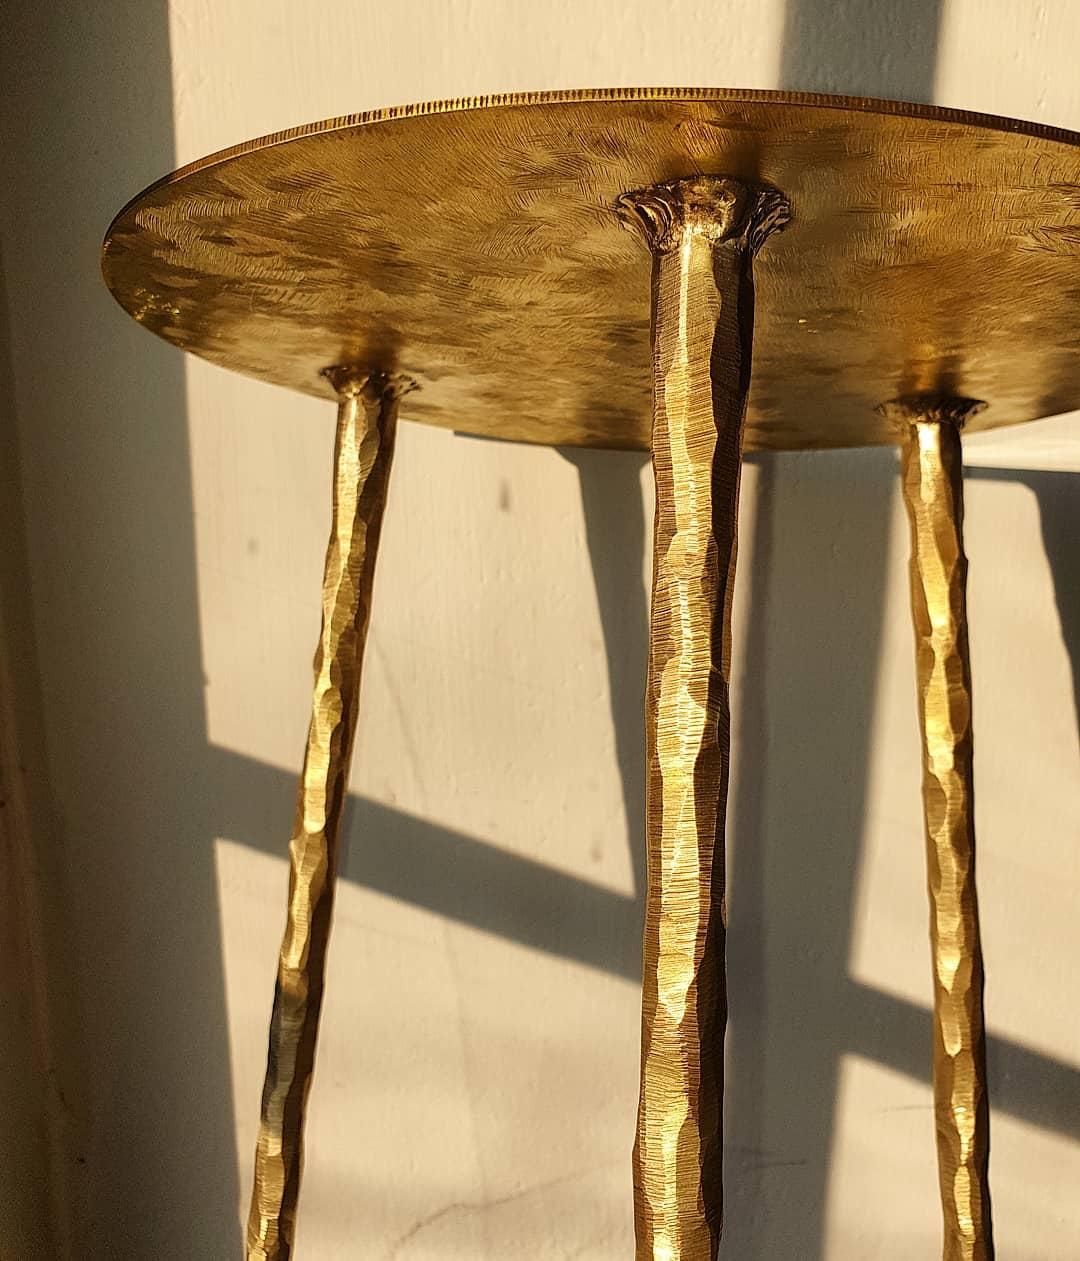 Brass side table signed by Lukasz Friedrich.
Side rable 